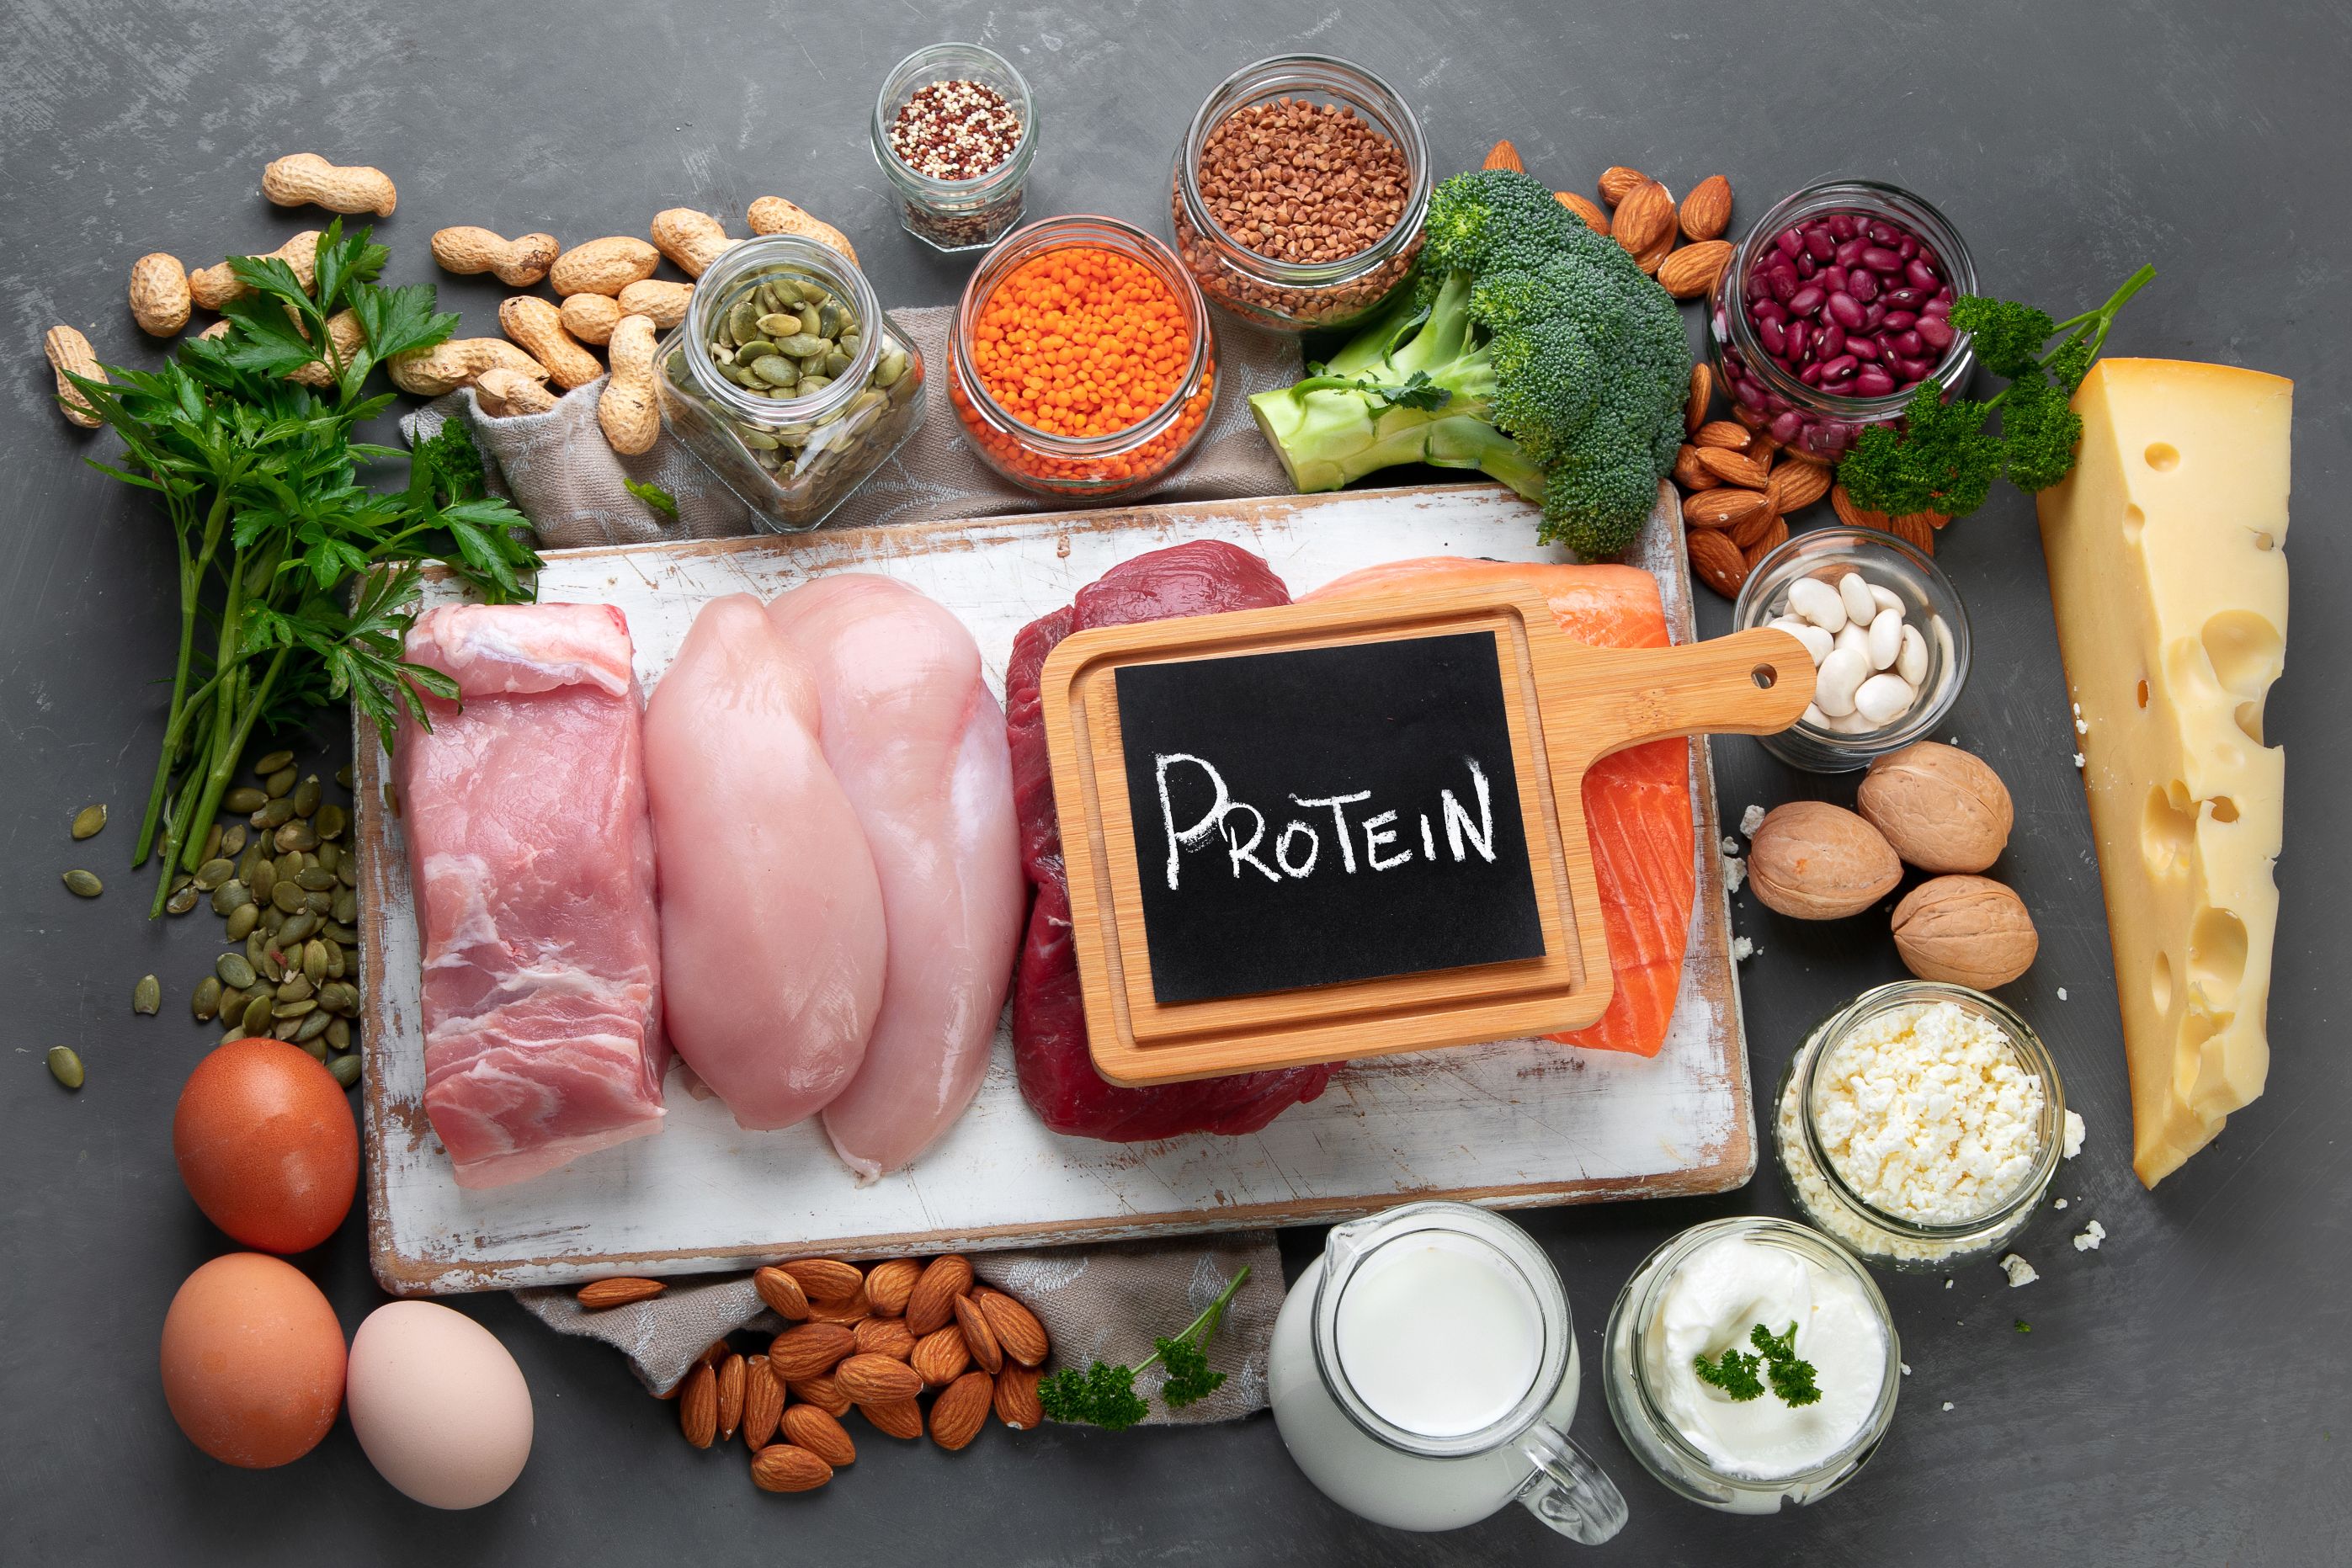 Best products high in protein. Healthy eating and diet concept. Top view, chalkboard